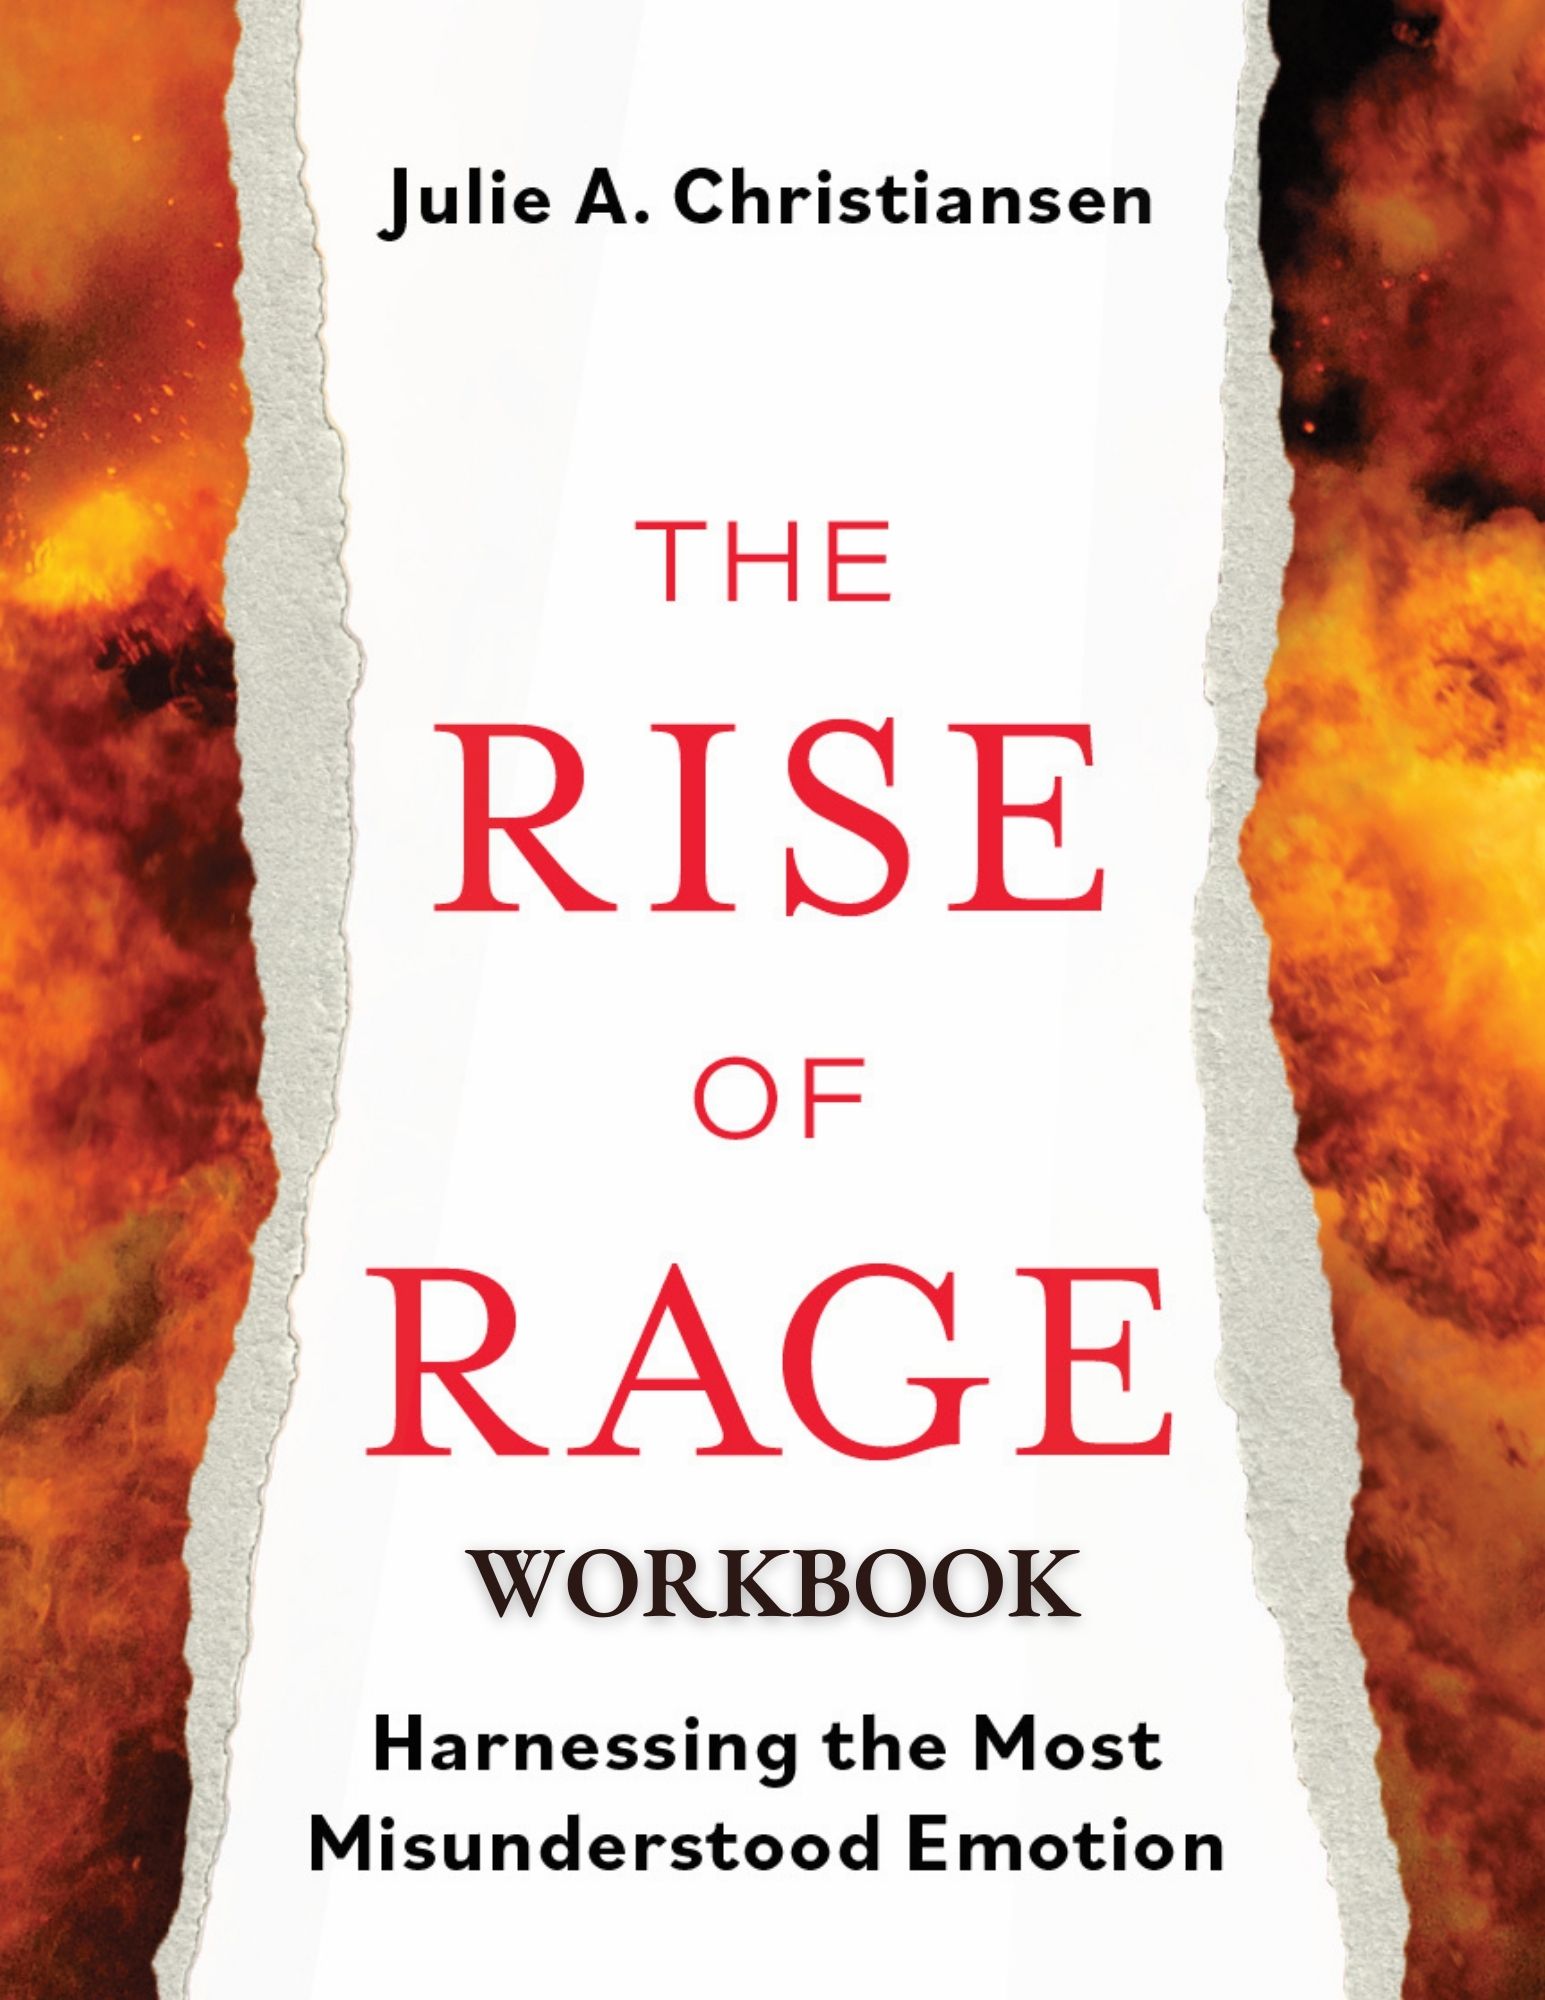 Cover of book Rise of Rage with flames and torn paper